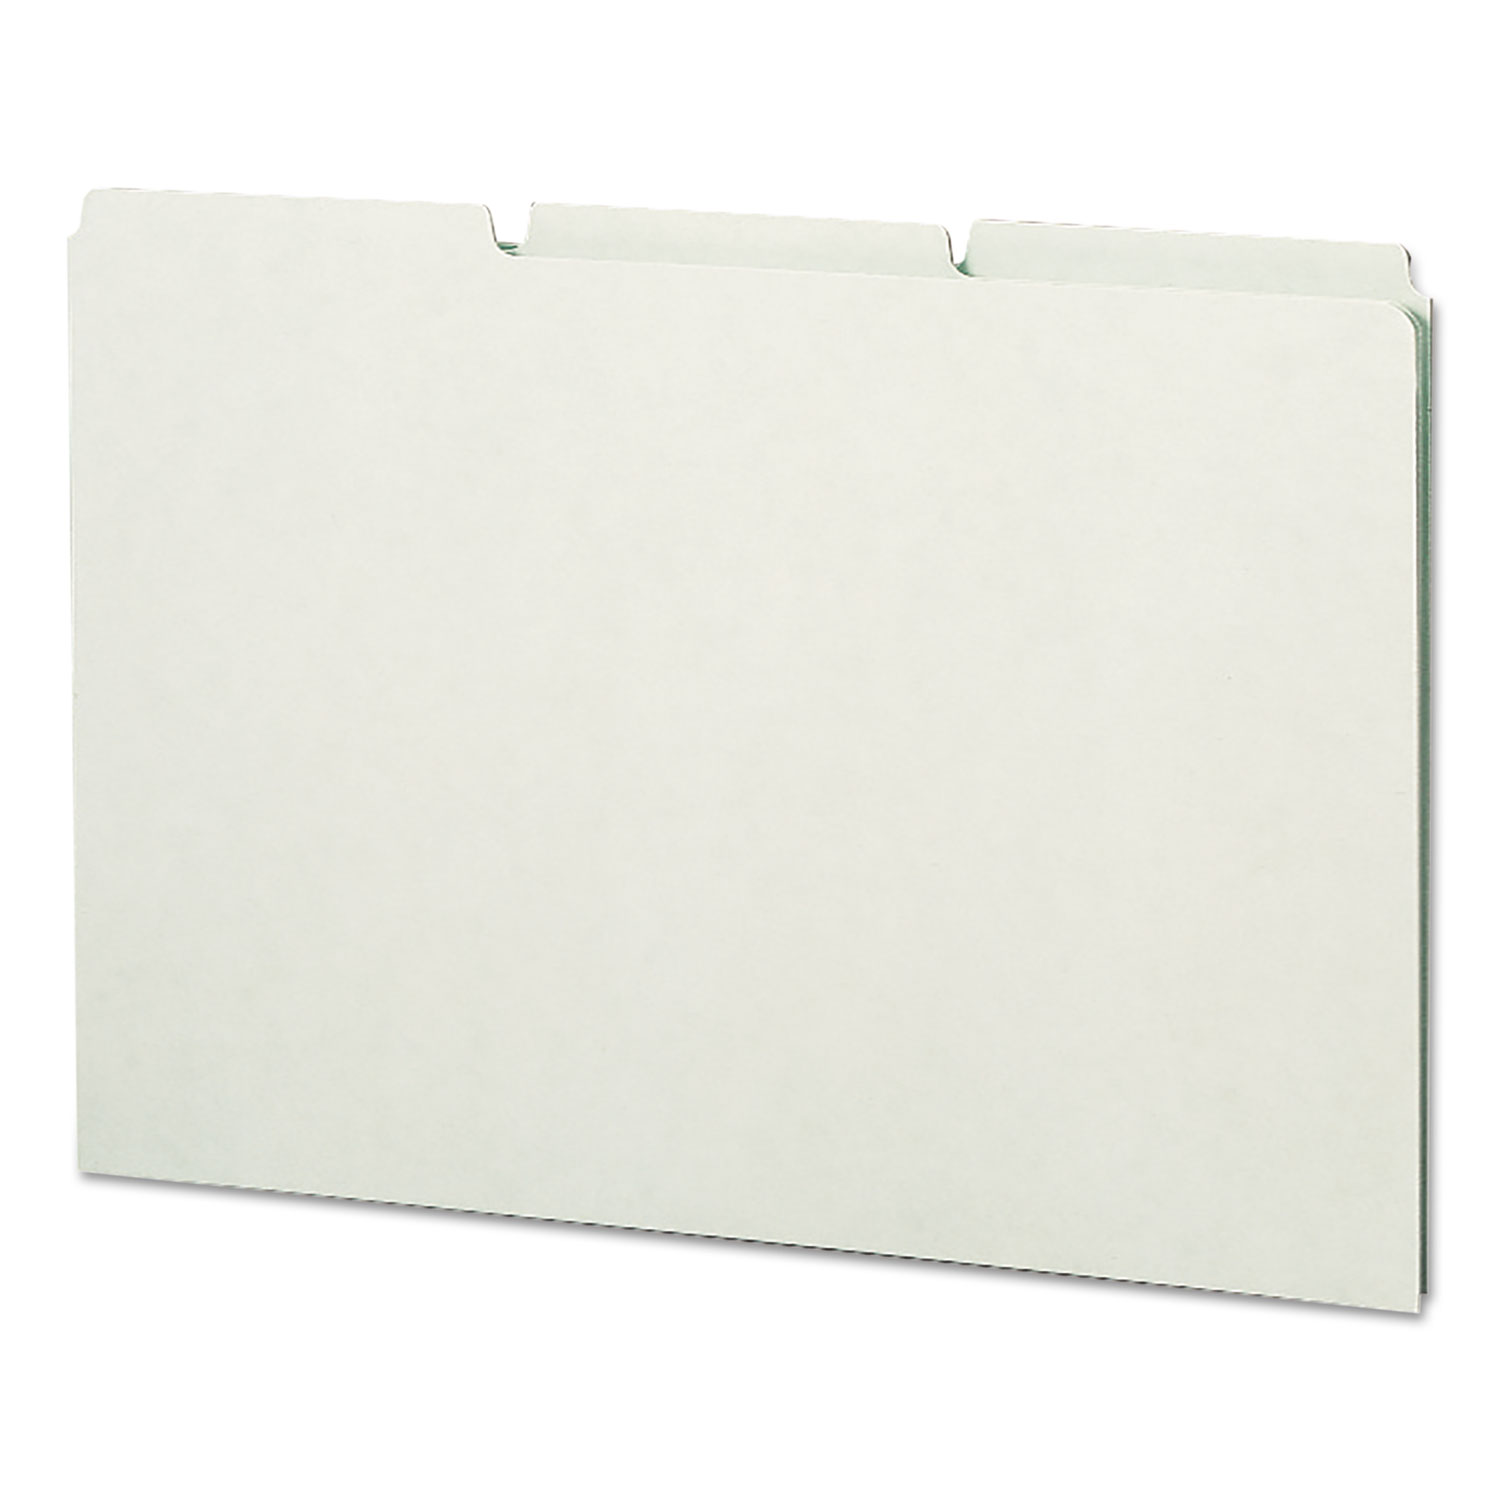  Smead 52334 Recycled Blank Top Tab File Guides, 1/3-Cut Top Tab, Blank, 8.5 x 14, Green, 50/Box (SMD52334) 